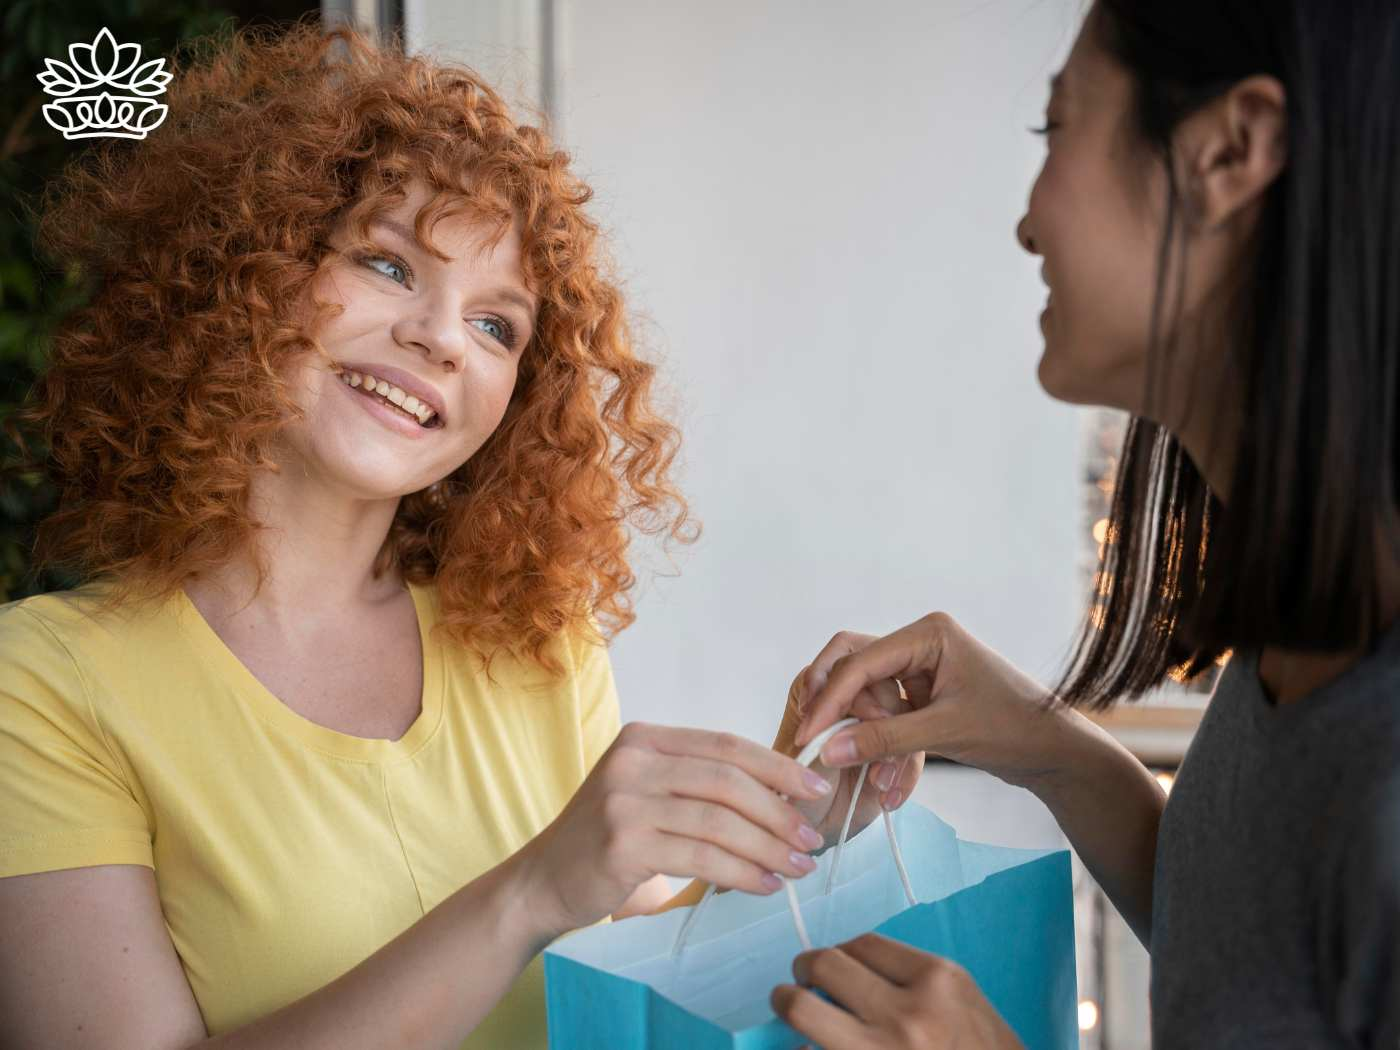 oyful woman with curly red hair receiving a gift box from a friend, expressing happiness and gratitude, from the Gift Boxes by Type Collection at Fabulous Flowers and Gifts.